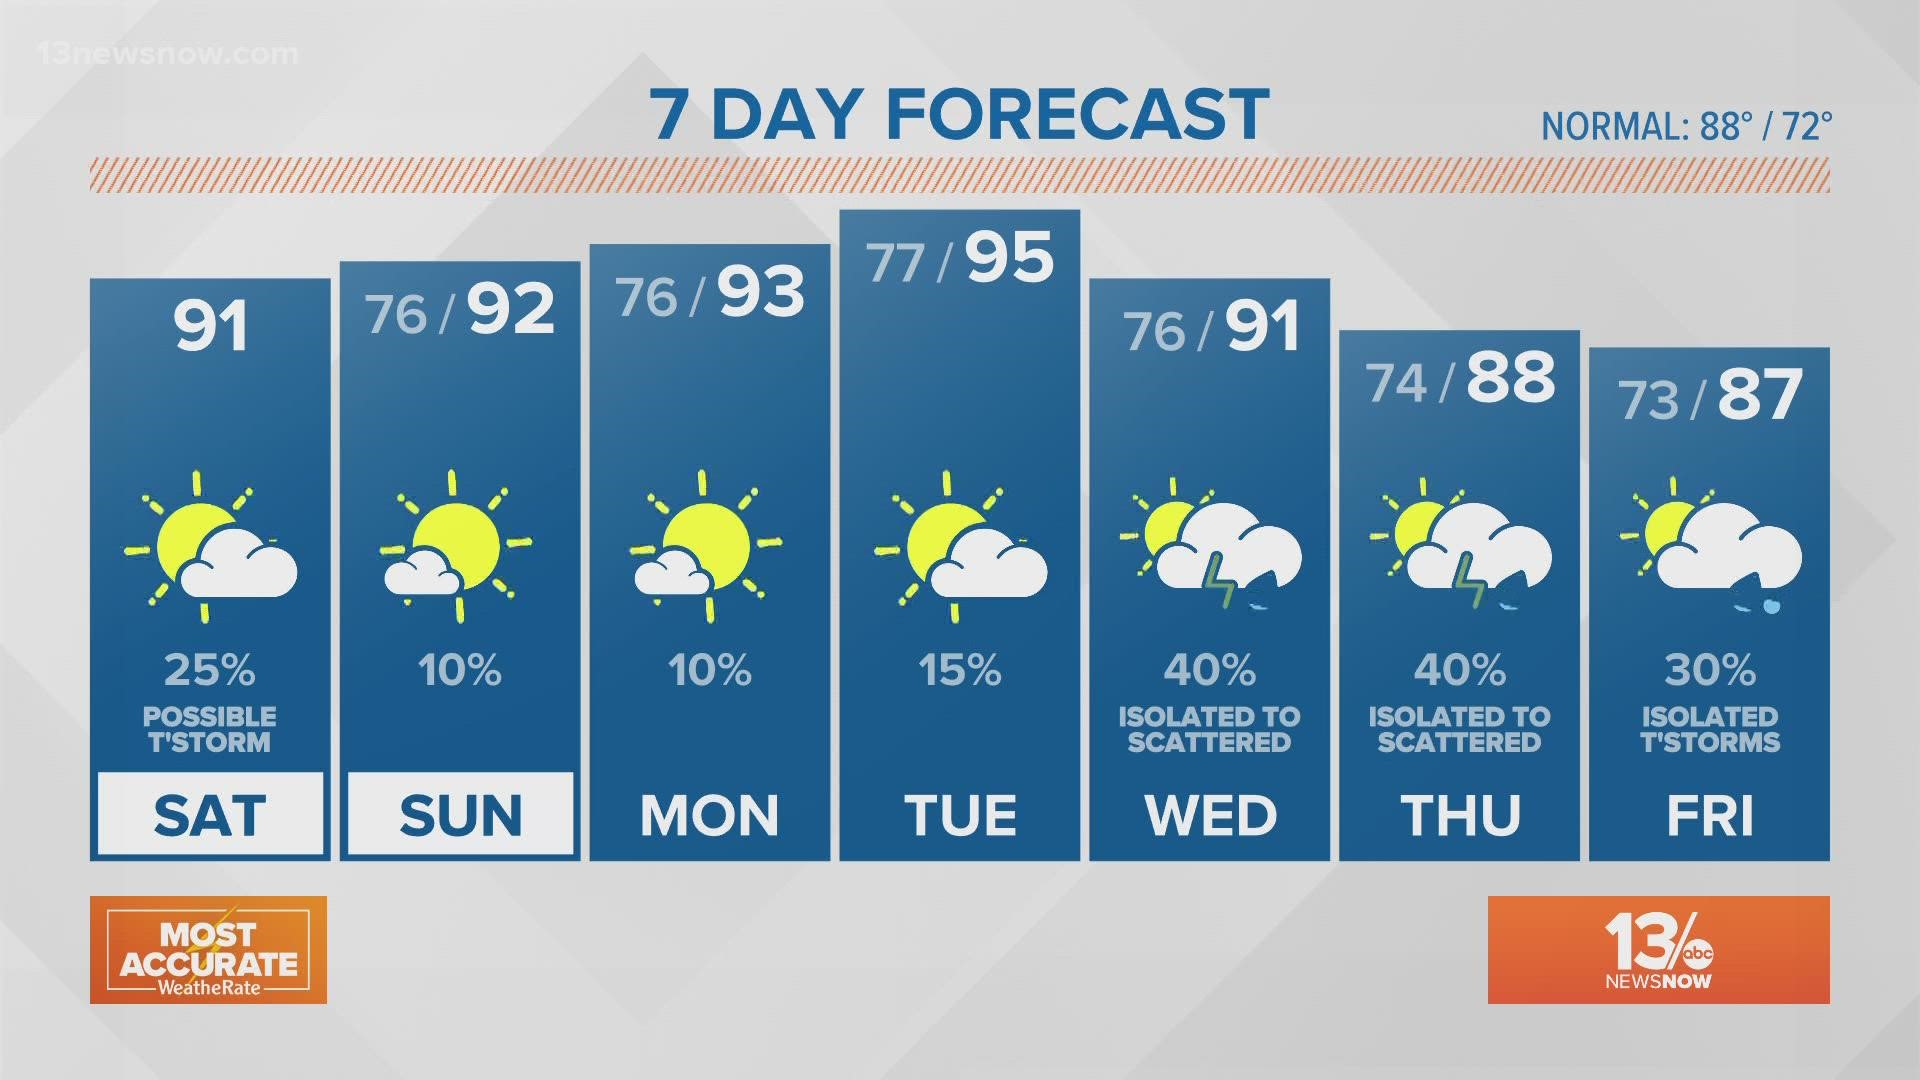 Highs in the low 90s for the weekend with a slightly stronger chance of rain for Saturday with 25%.